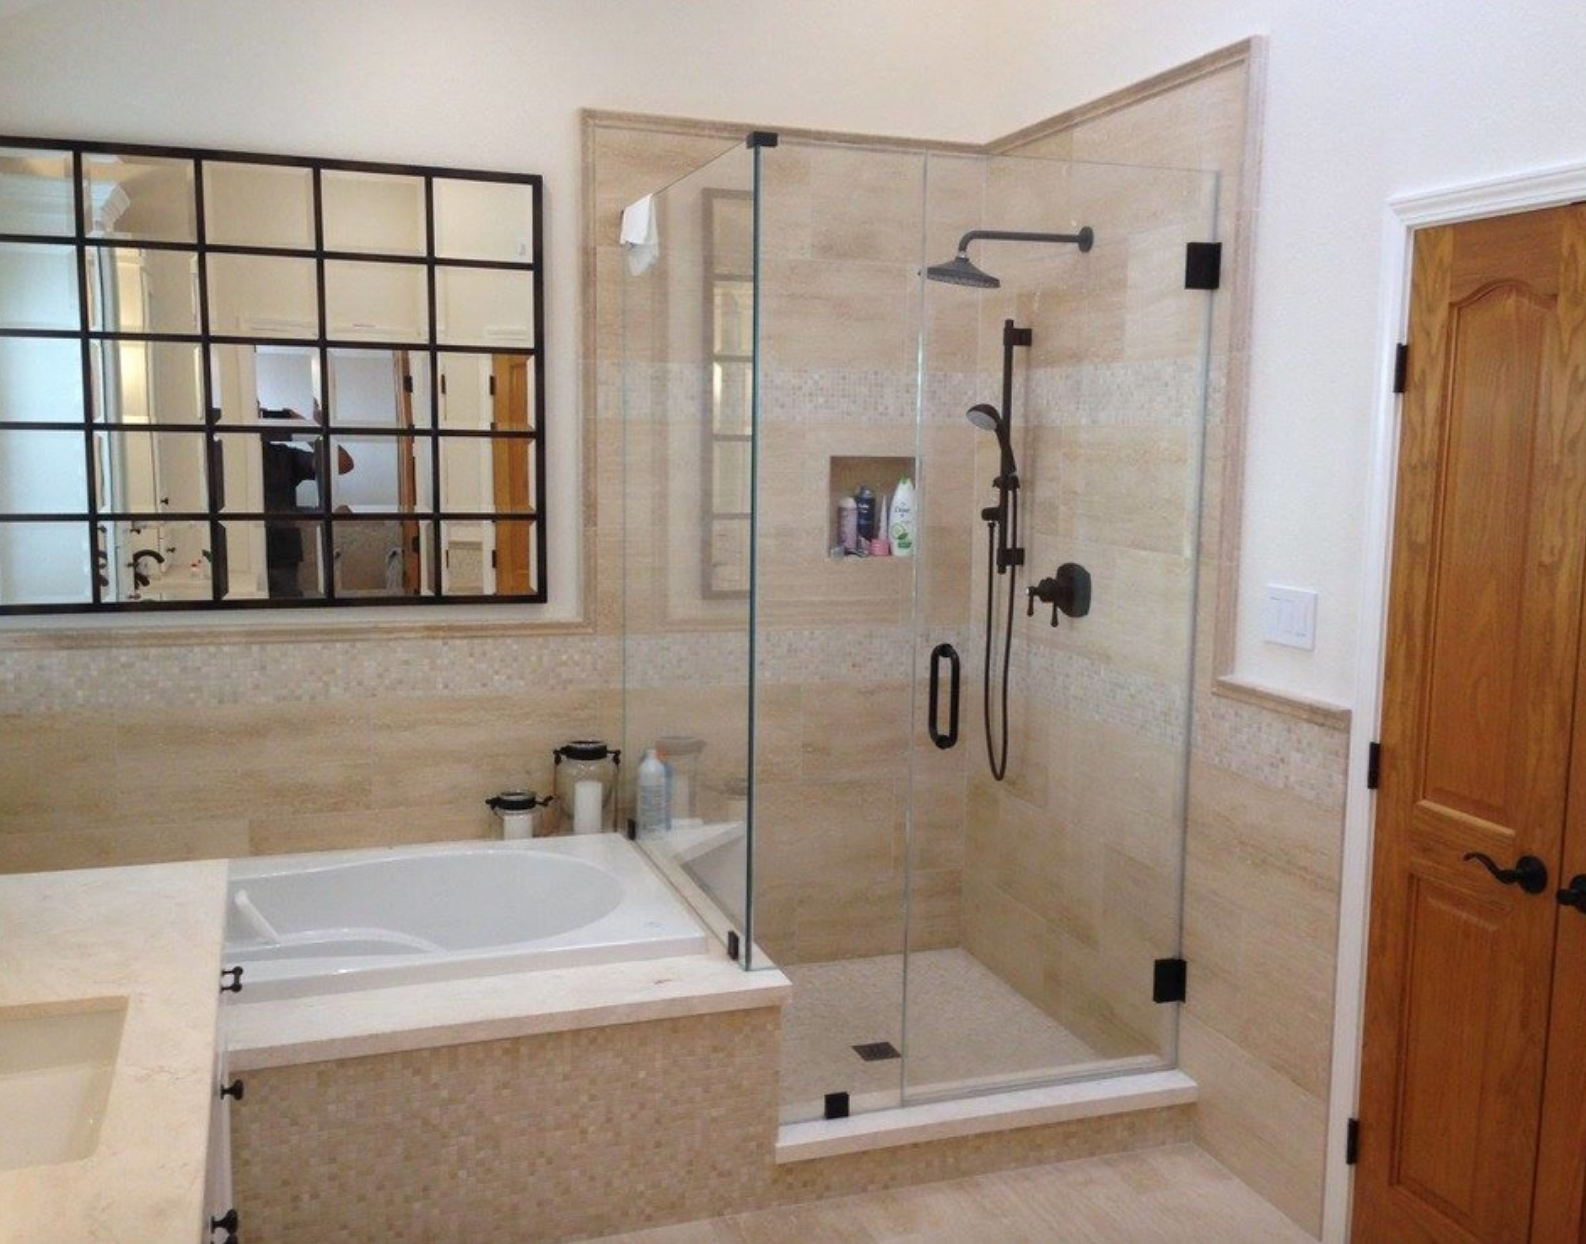 Master Bathroom Gets Custom Cabinets with Towers, a New Tub and New Wall Tile Paneling